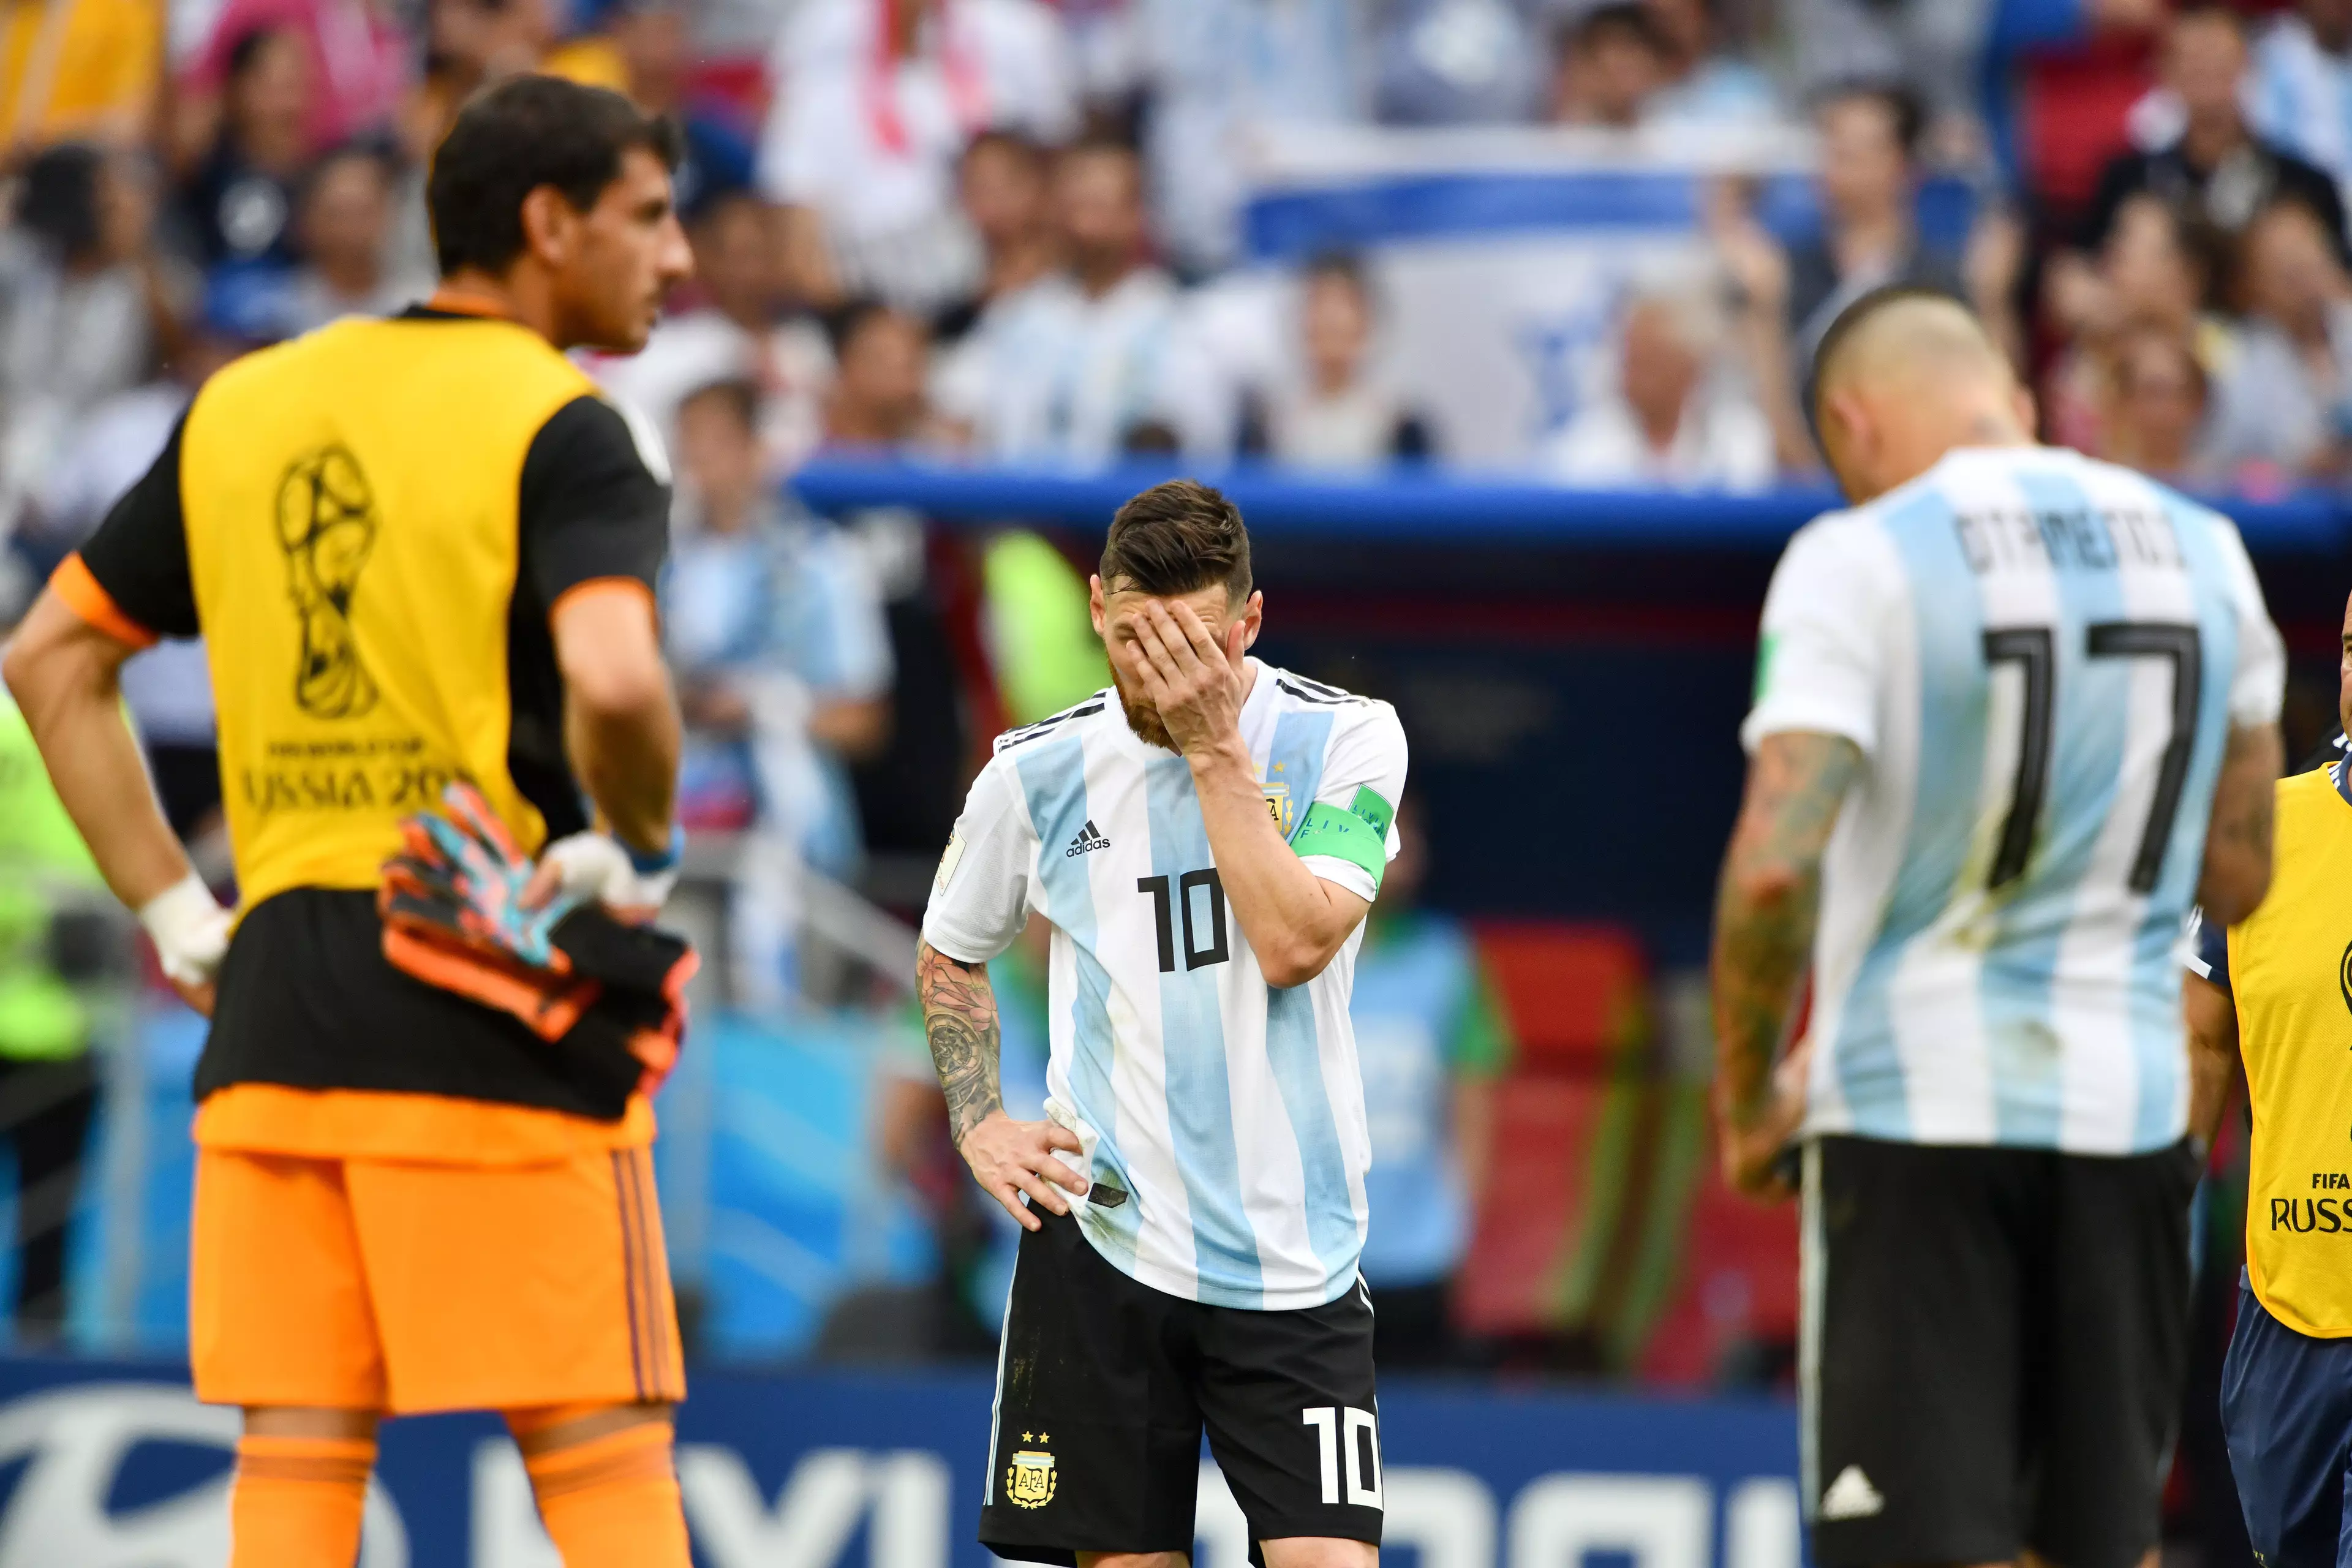 Messi dejected at the end of the game against France. Image: PA Images